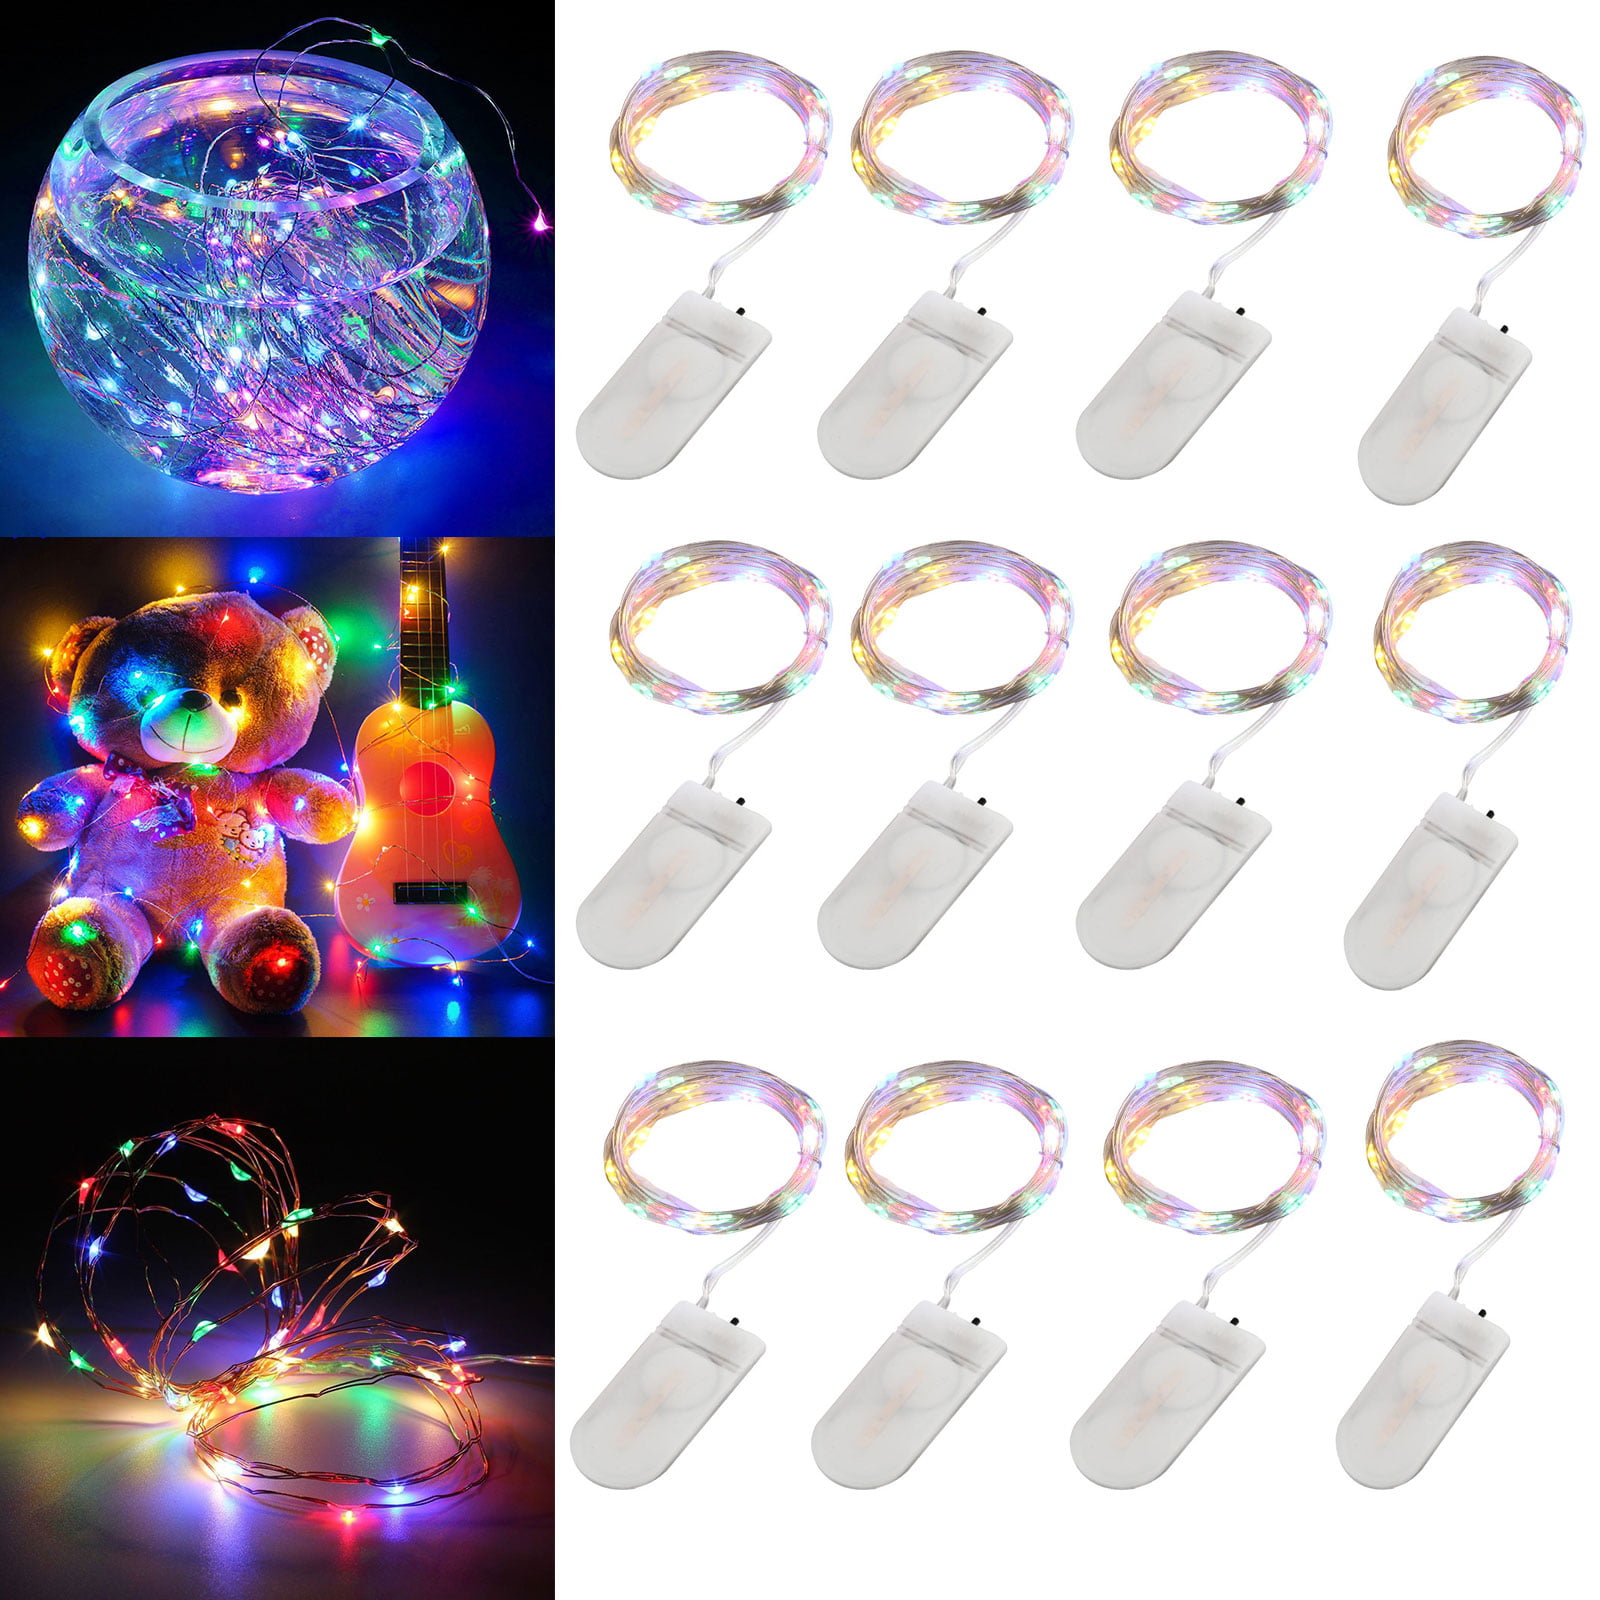 6PCS 20 LED Battery Copper Wire String Fairy Lights Wedding Party Light Decor